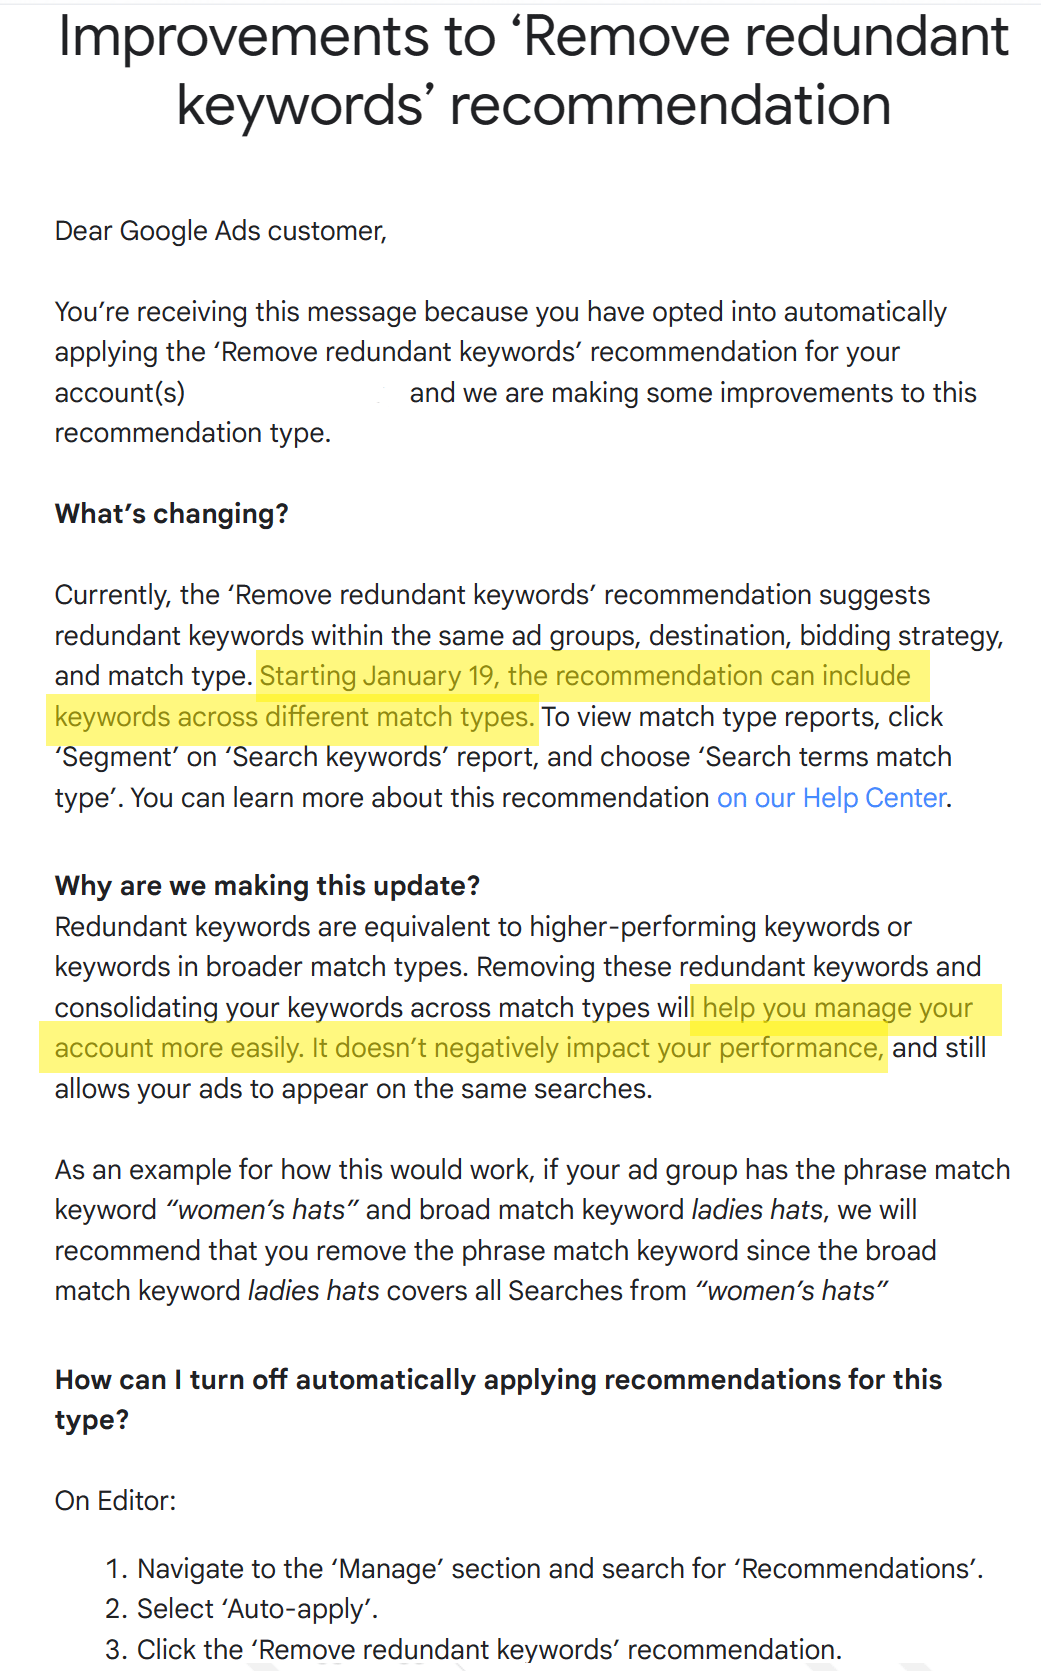 Google's change to the redundant keyword policy will go into effect on January 19, 2023.